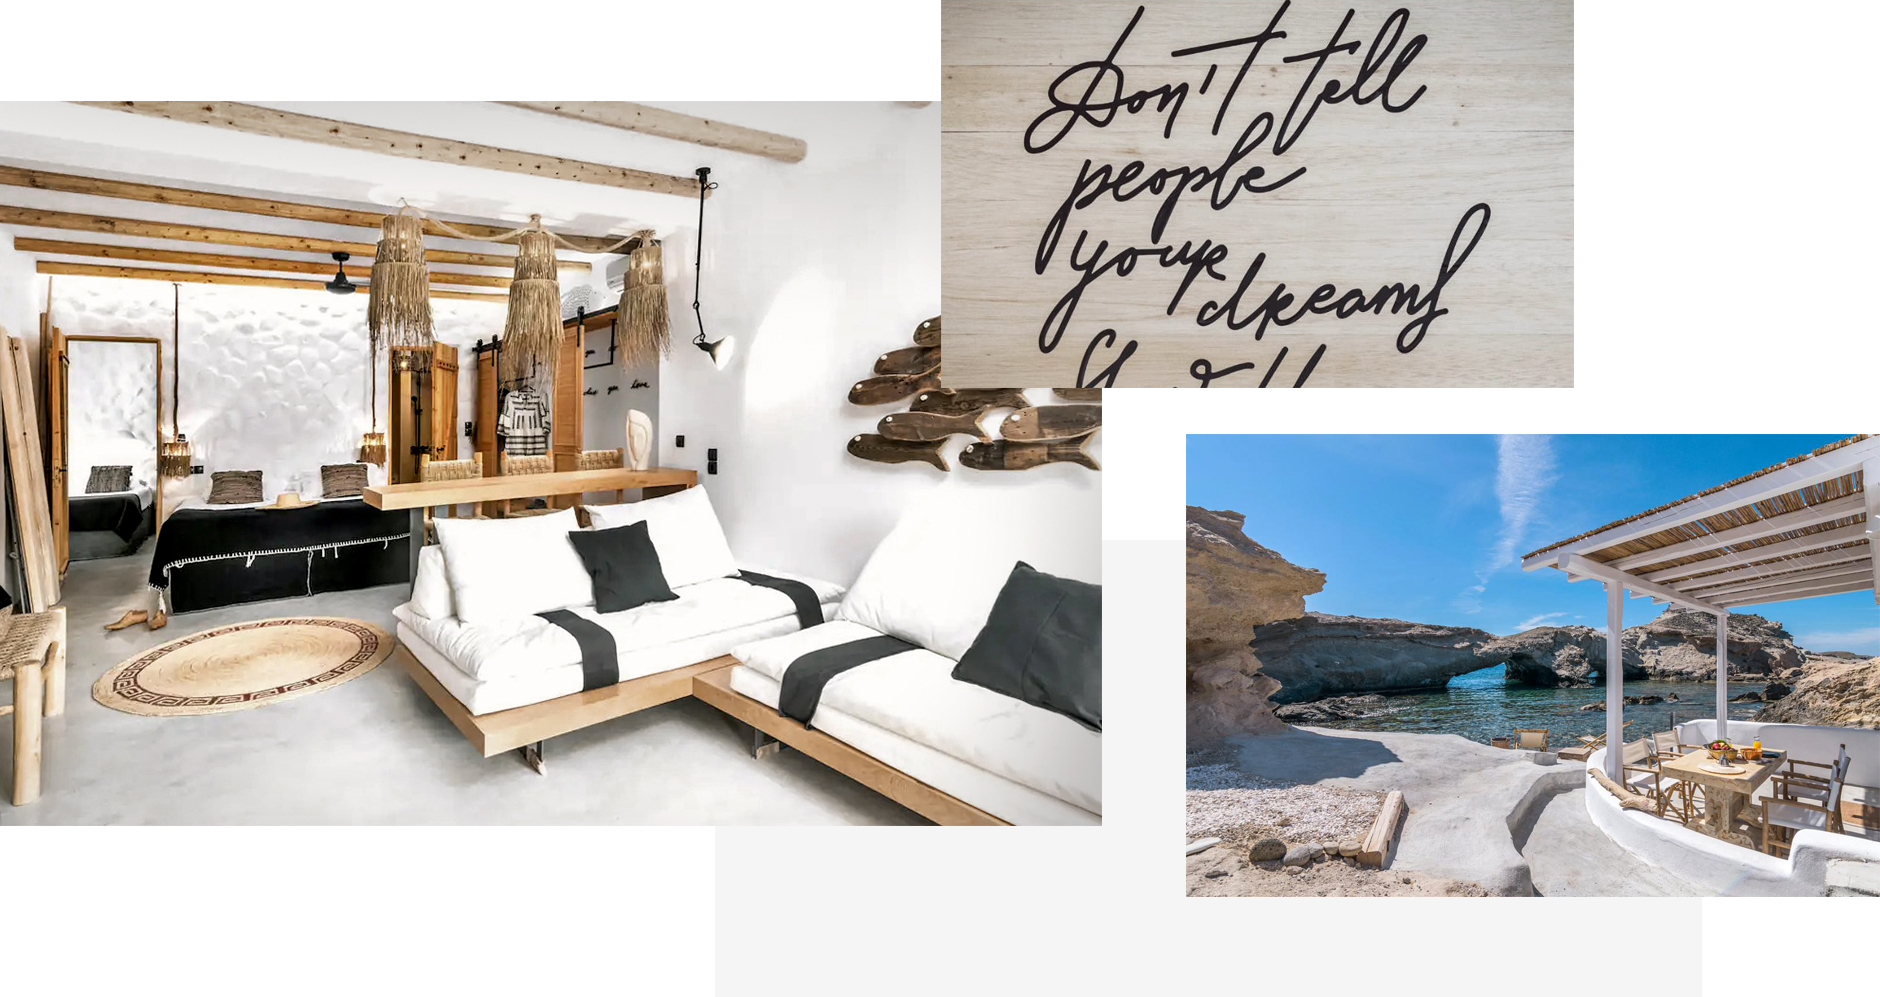 Aqua House, Milos, Greece. The ultimate guide to the best chic hotels in Milos, Greece by Travelplusstyle.com